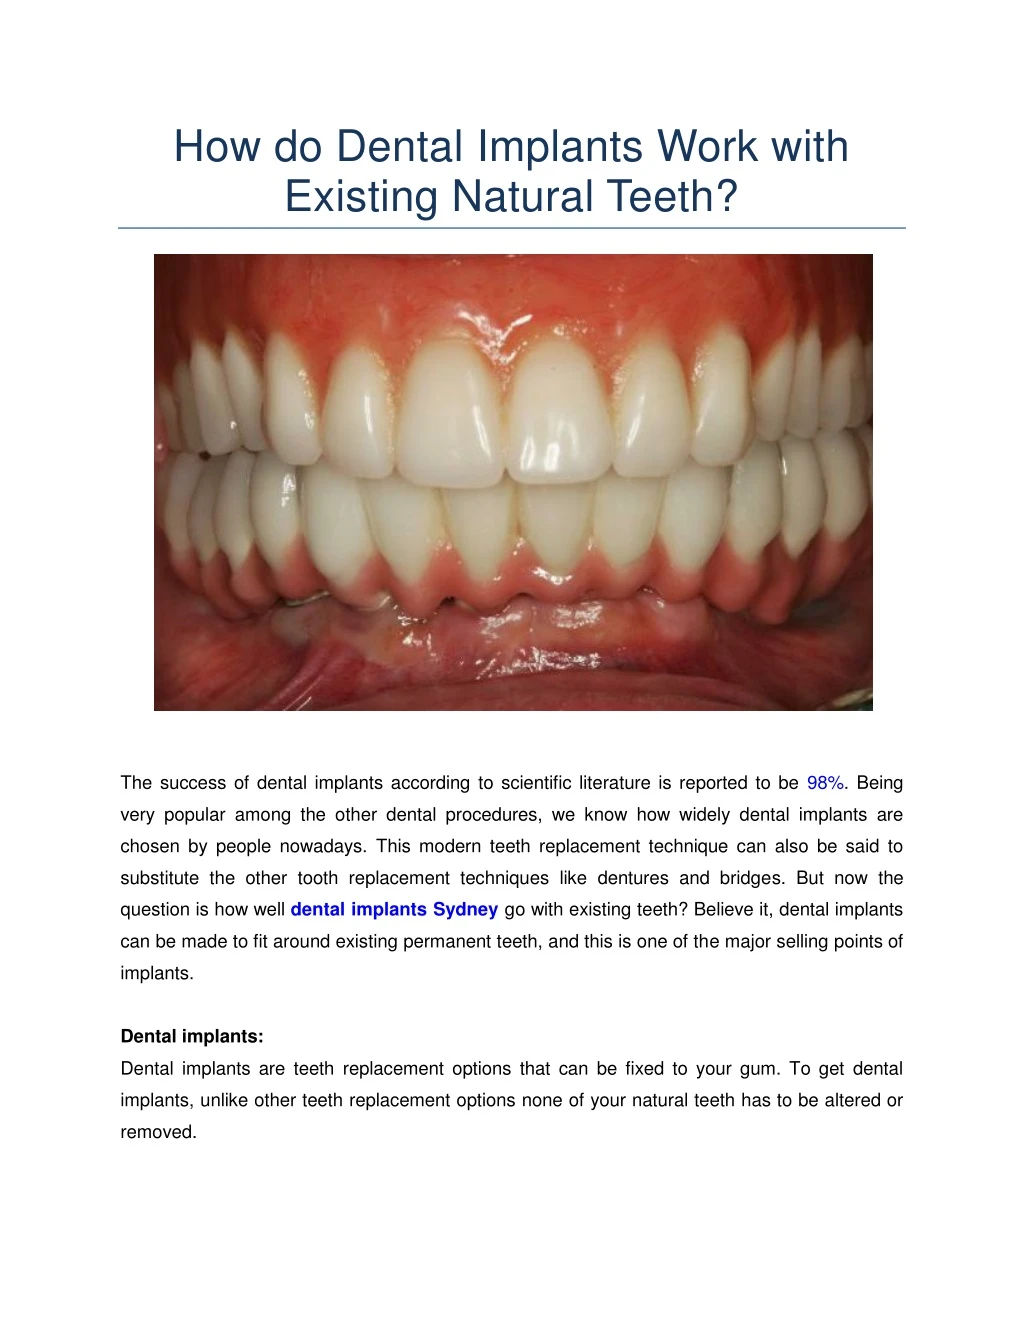 how do dental implants work with existing natural